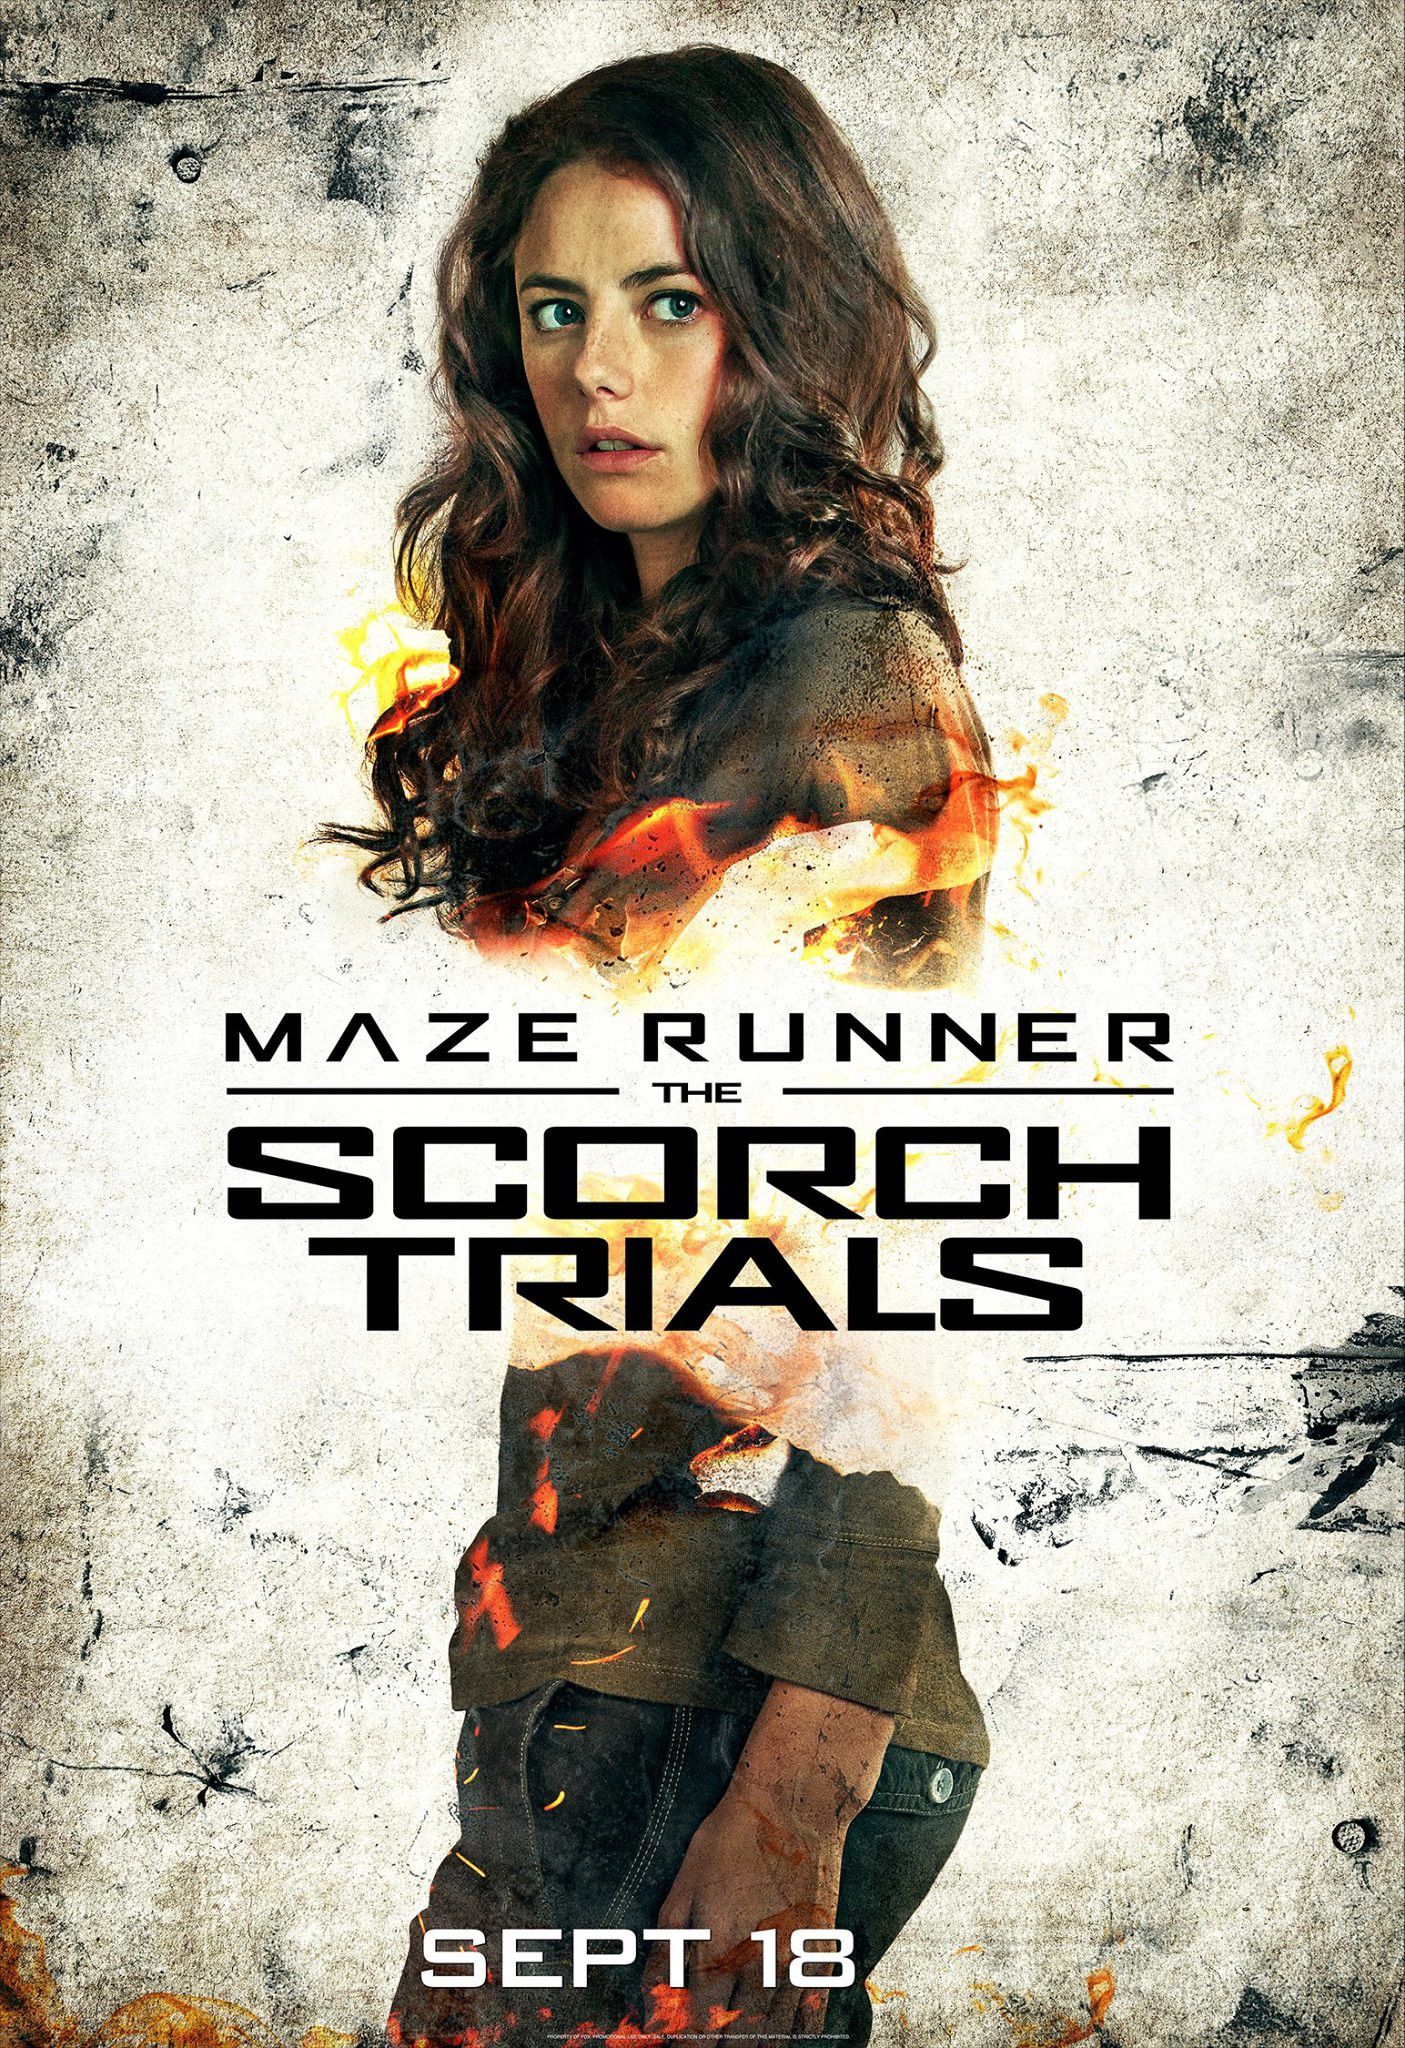 The Maze Runner Scorch Trials Character Poster 6